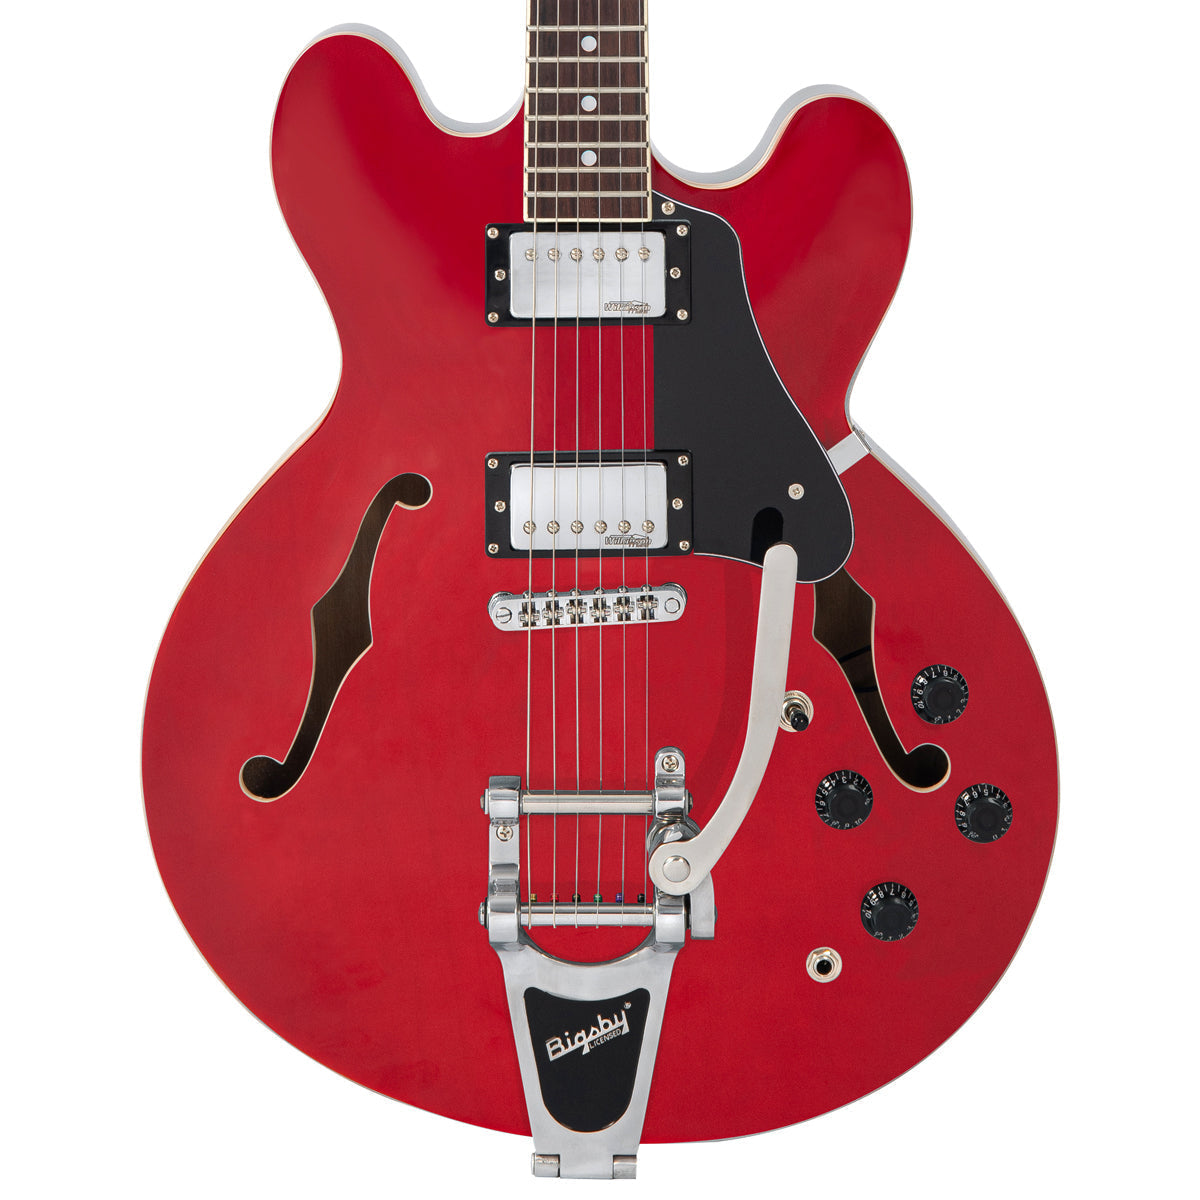 Vintage VSA500B ReIssued Semi Acoustic Guitar w/Bigsby ~ Cherry Red, Electric Guitar for sale at Richards Guitars.